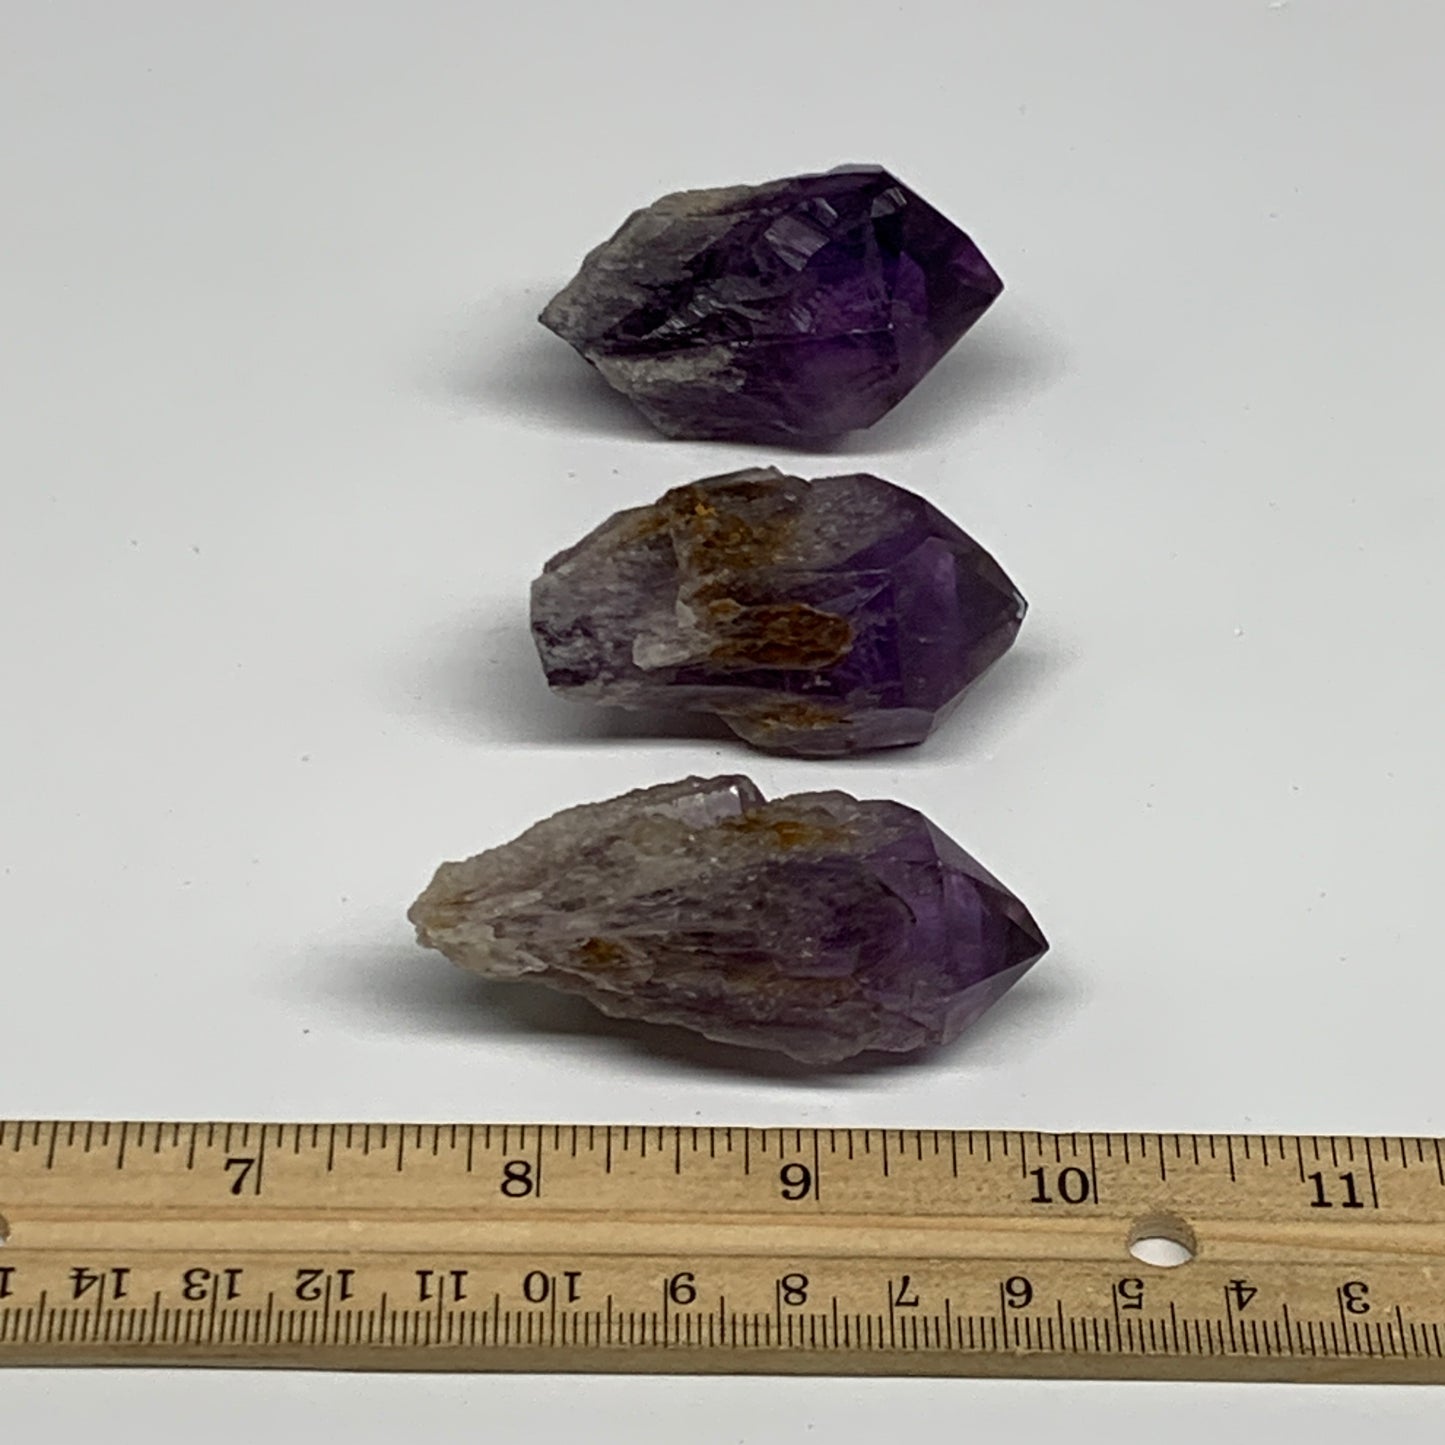 125.7g, 2" - 2.4", 3pcs, Amethyst Point Polished Rough lower part, B32395